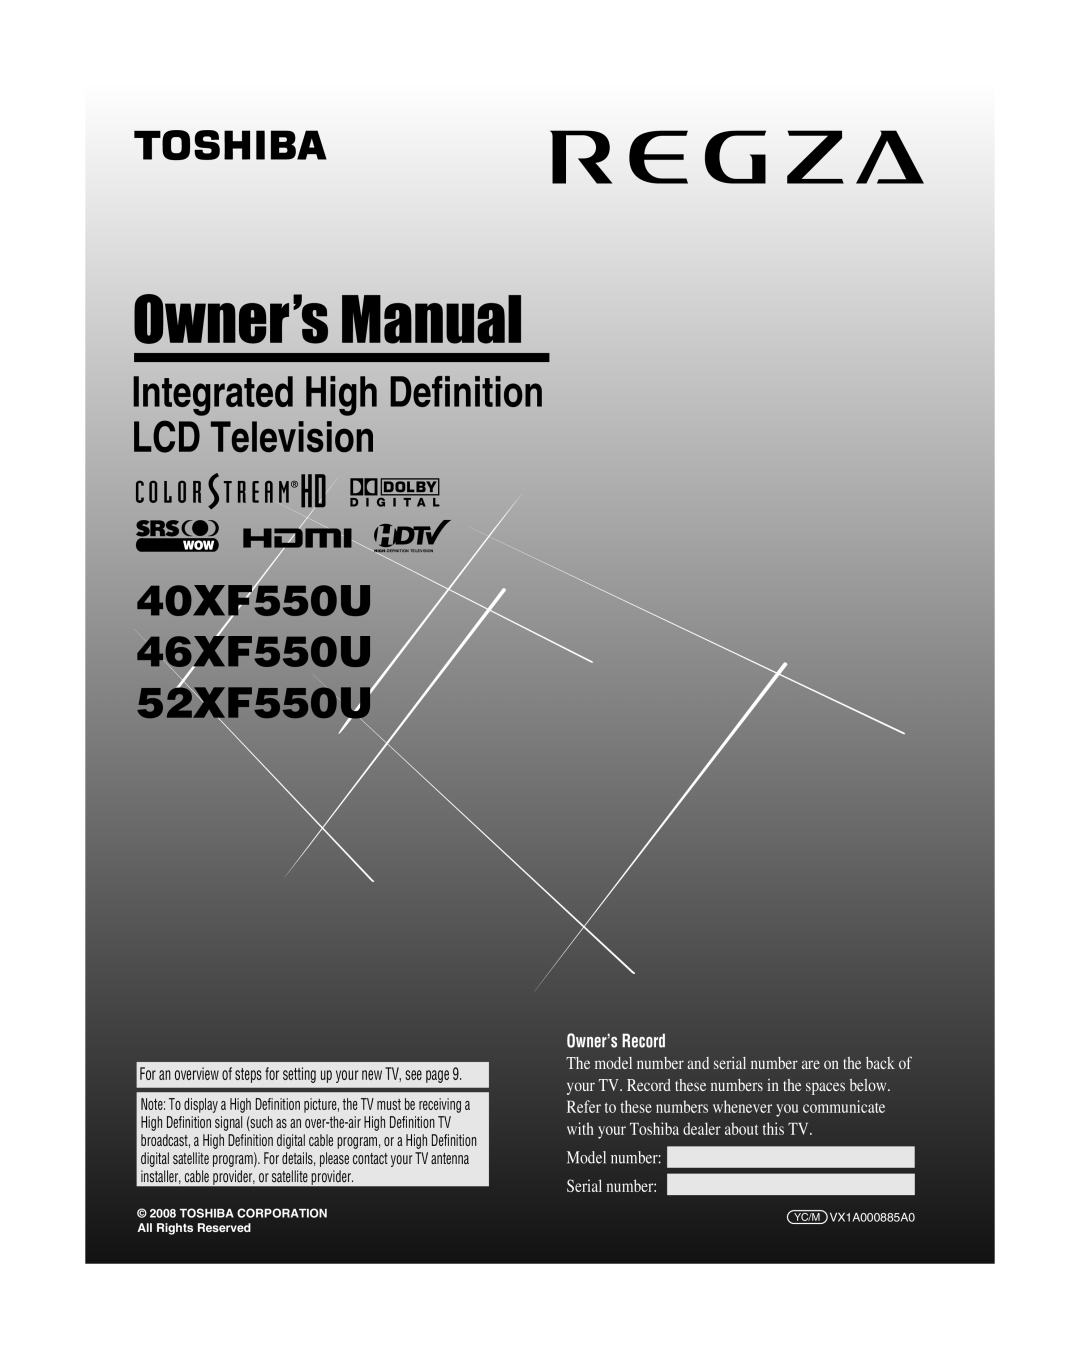 Toshiba manual For an overview of steps for setting up your new TV, see page, 40XF550U 46XF550U 52XF550U 